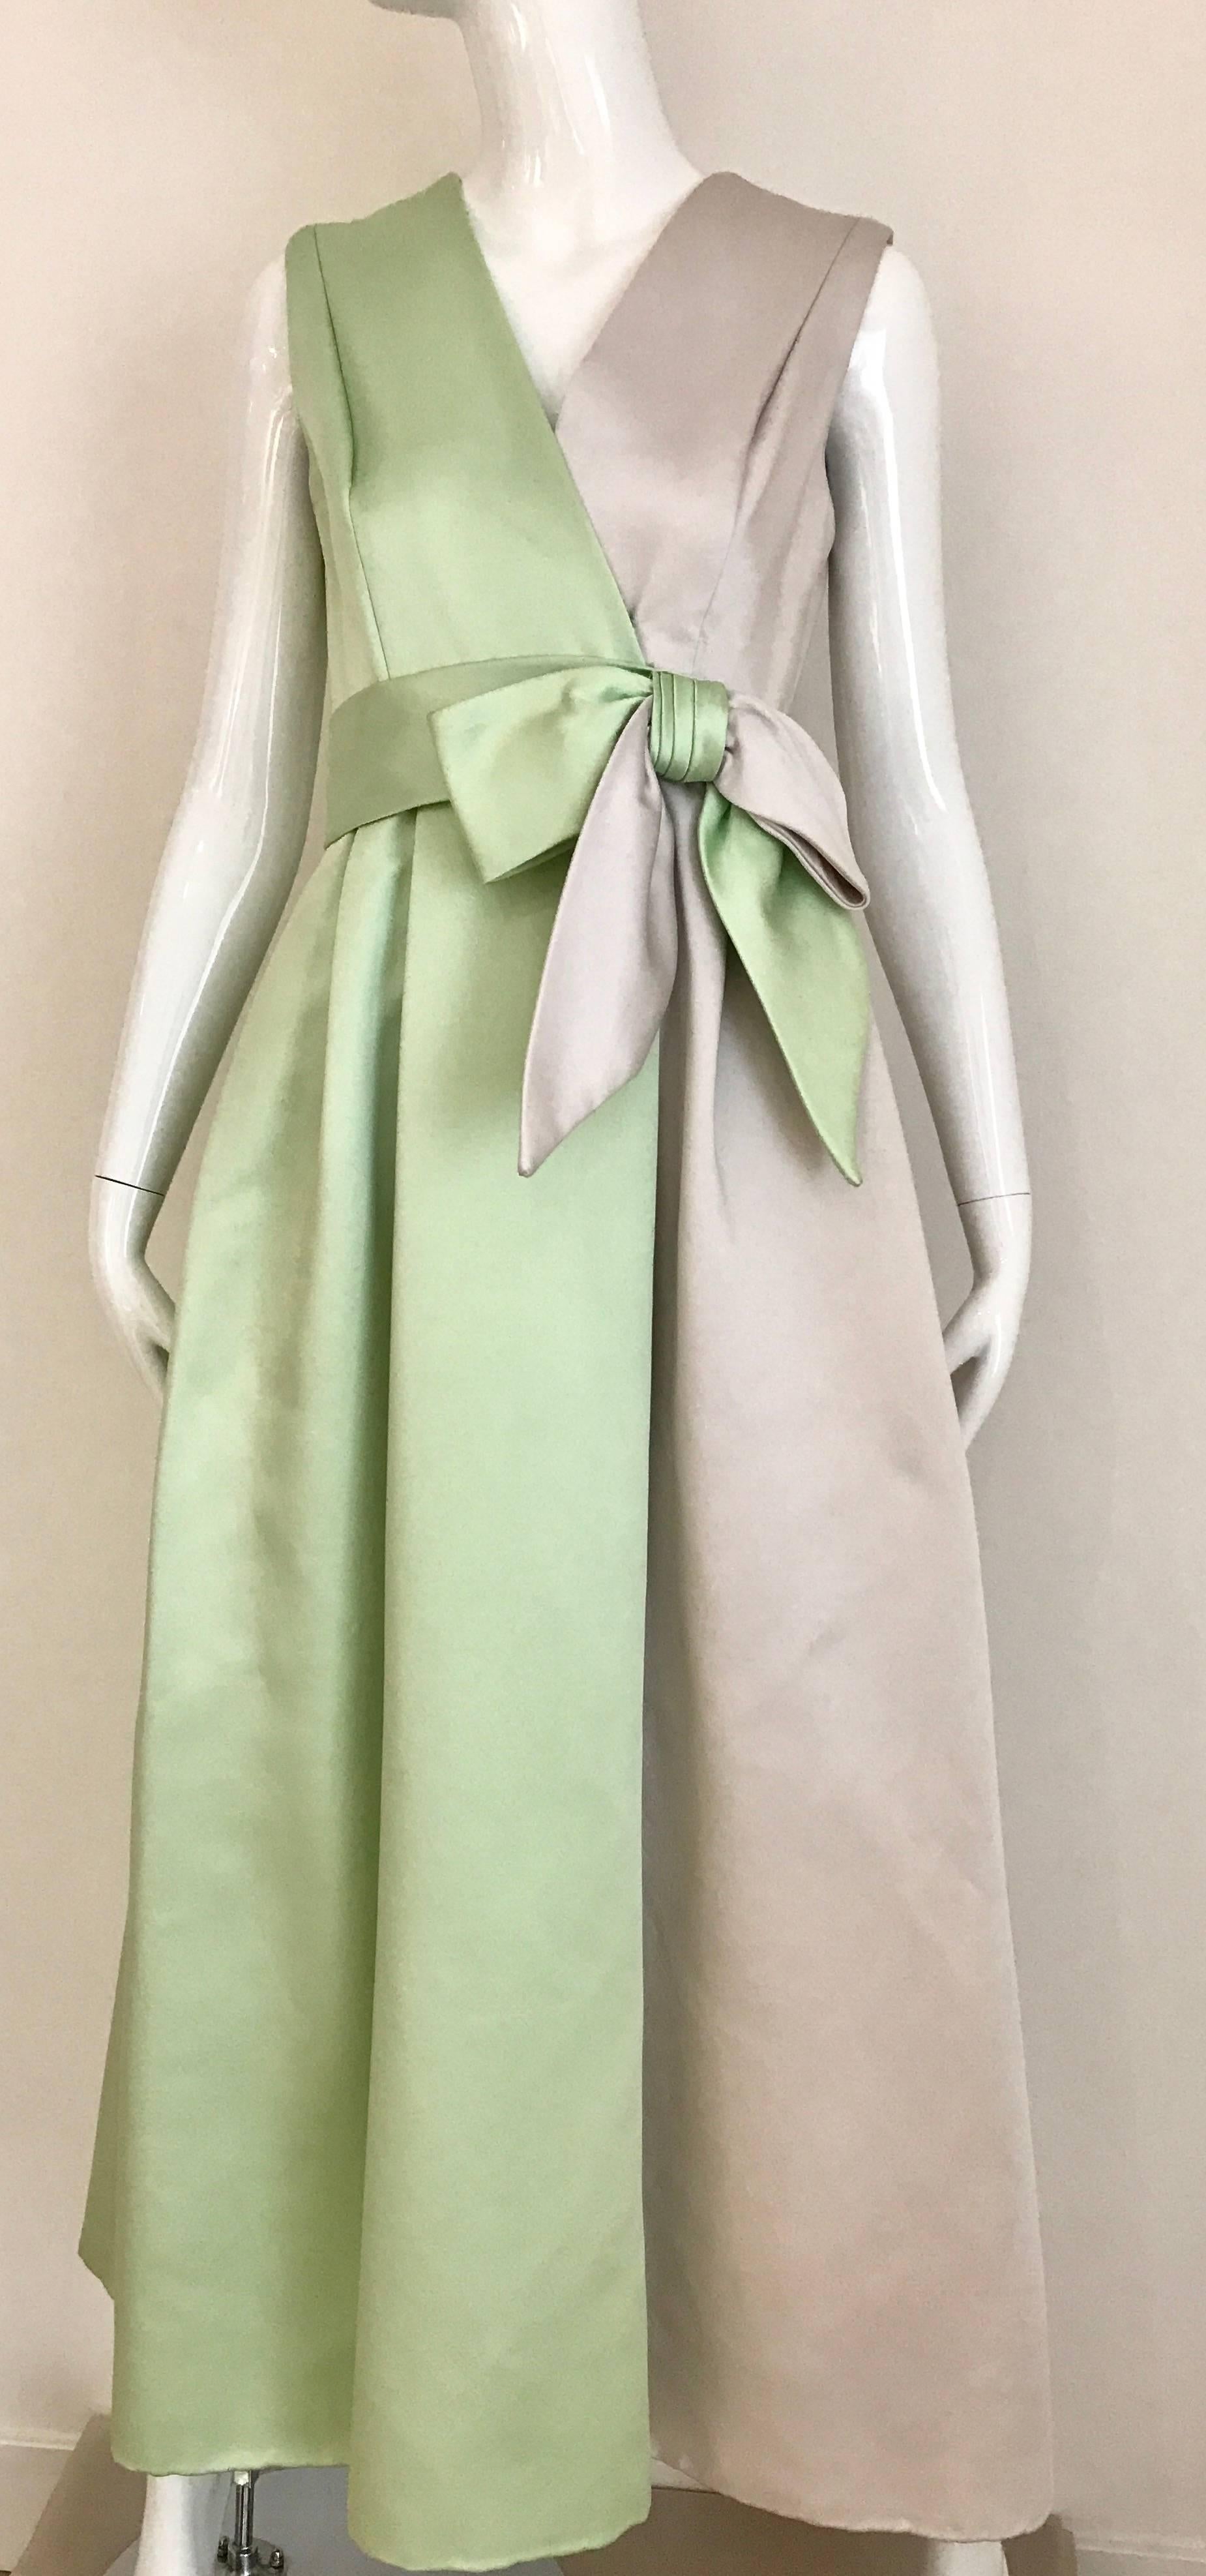 Gray 1960s Celadon Green and Grey Sleeveless Silk Dres with Bow